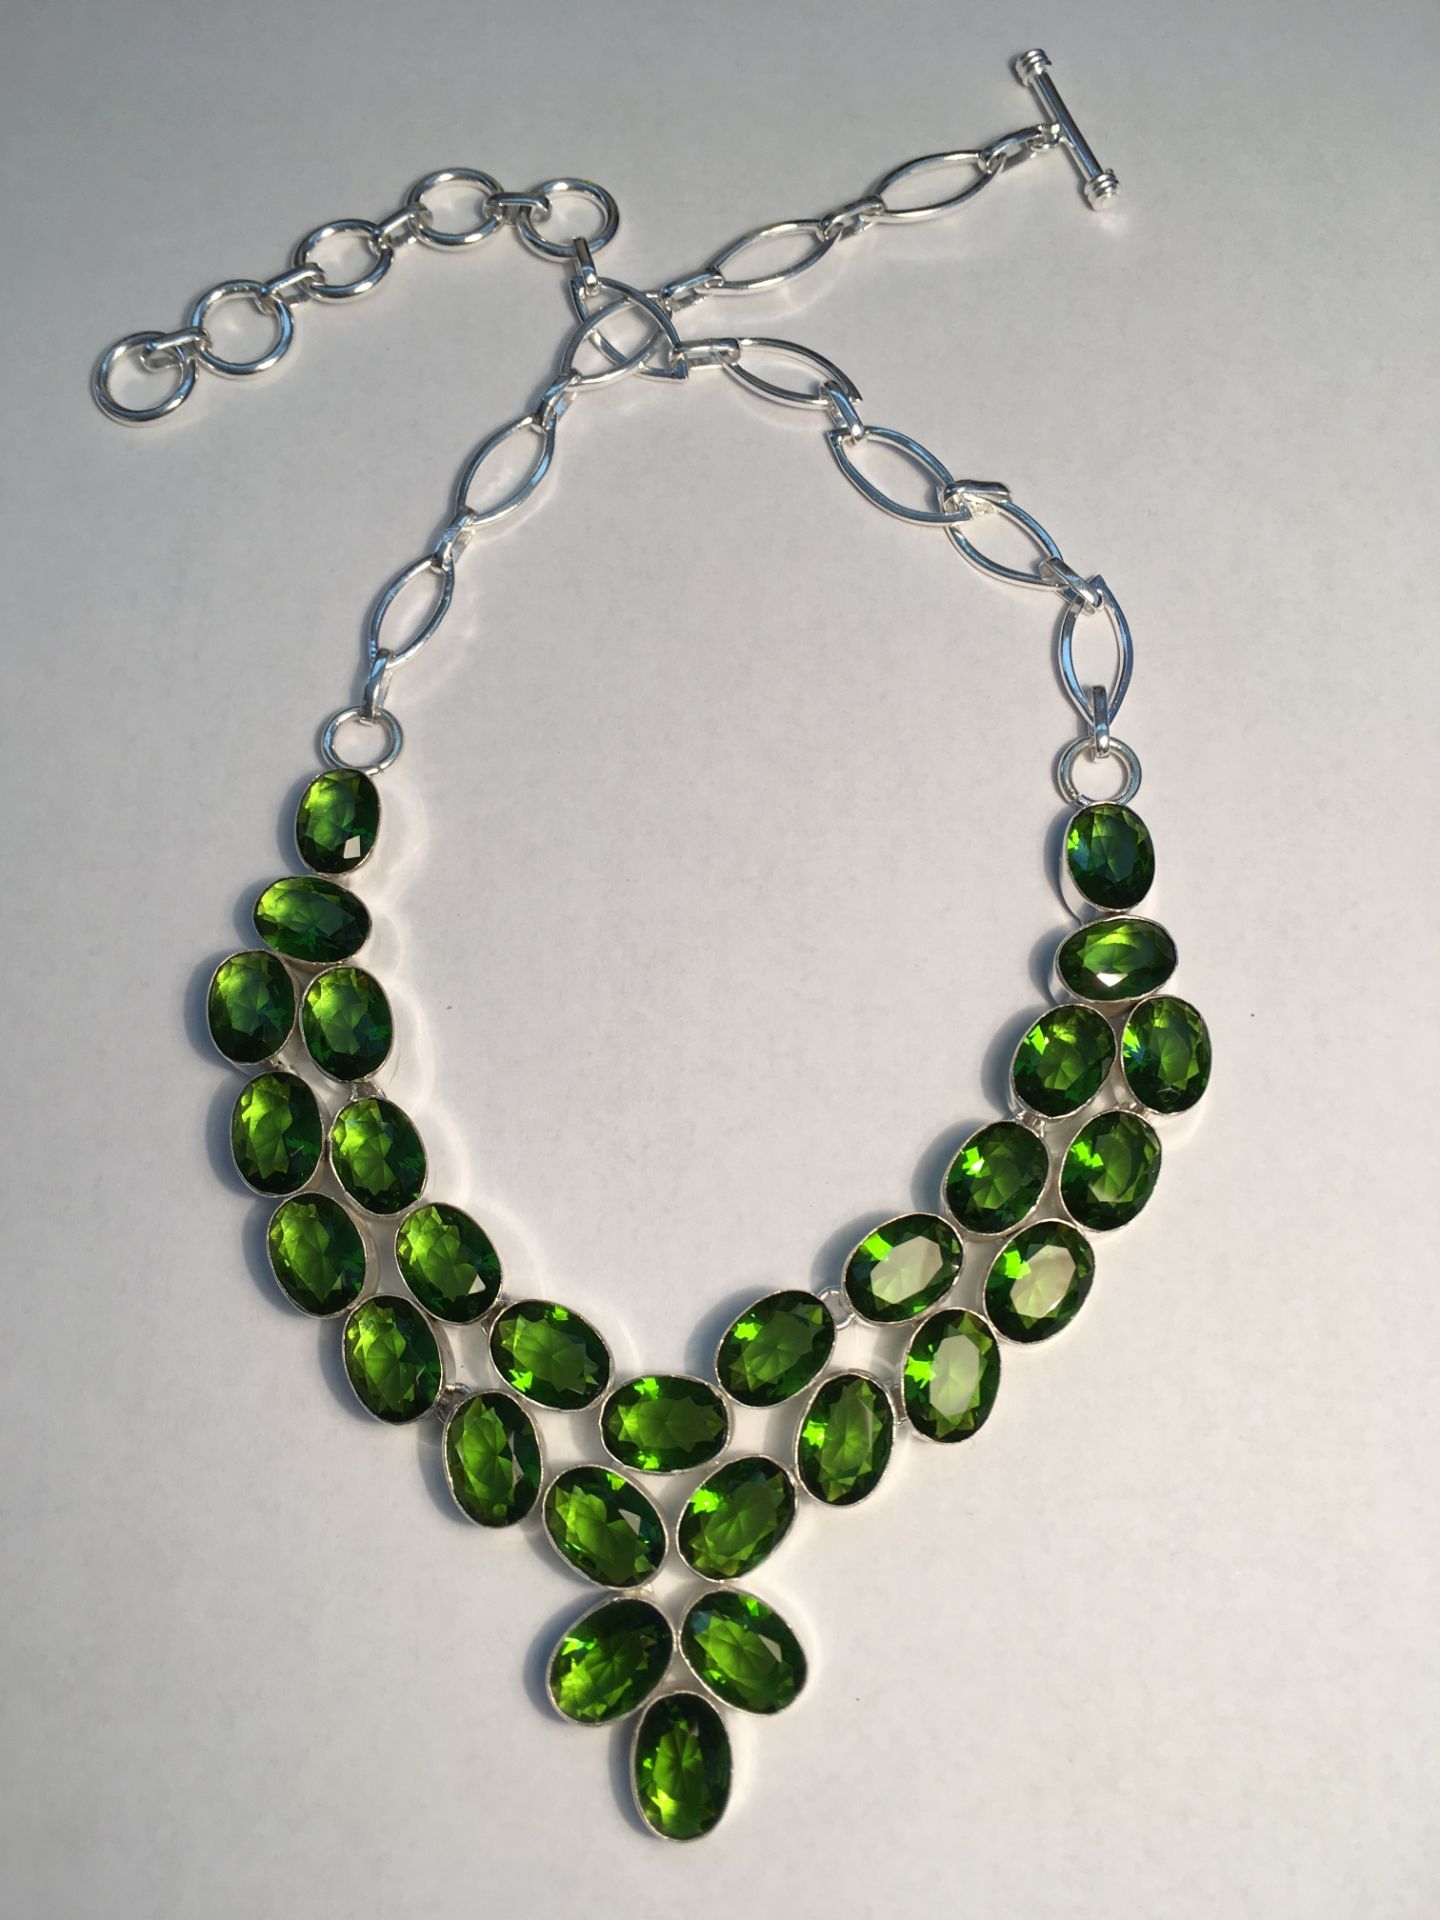 Peridot Gems .925 Silver Jewellery Necklace 18 Inches - Image 2 of 2